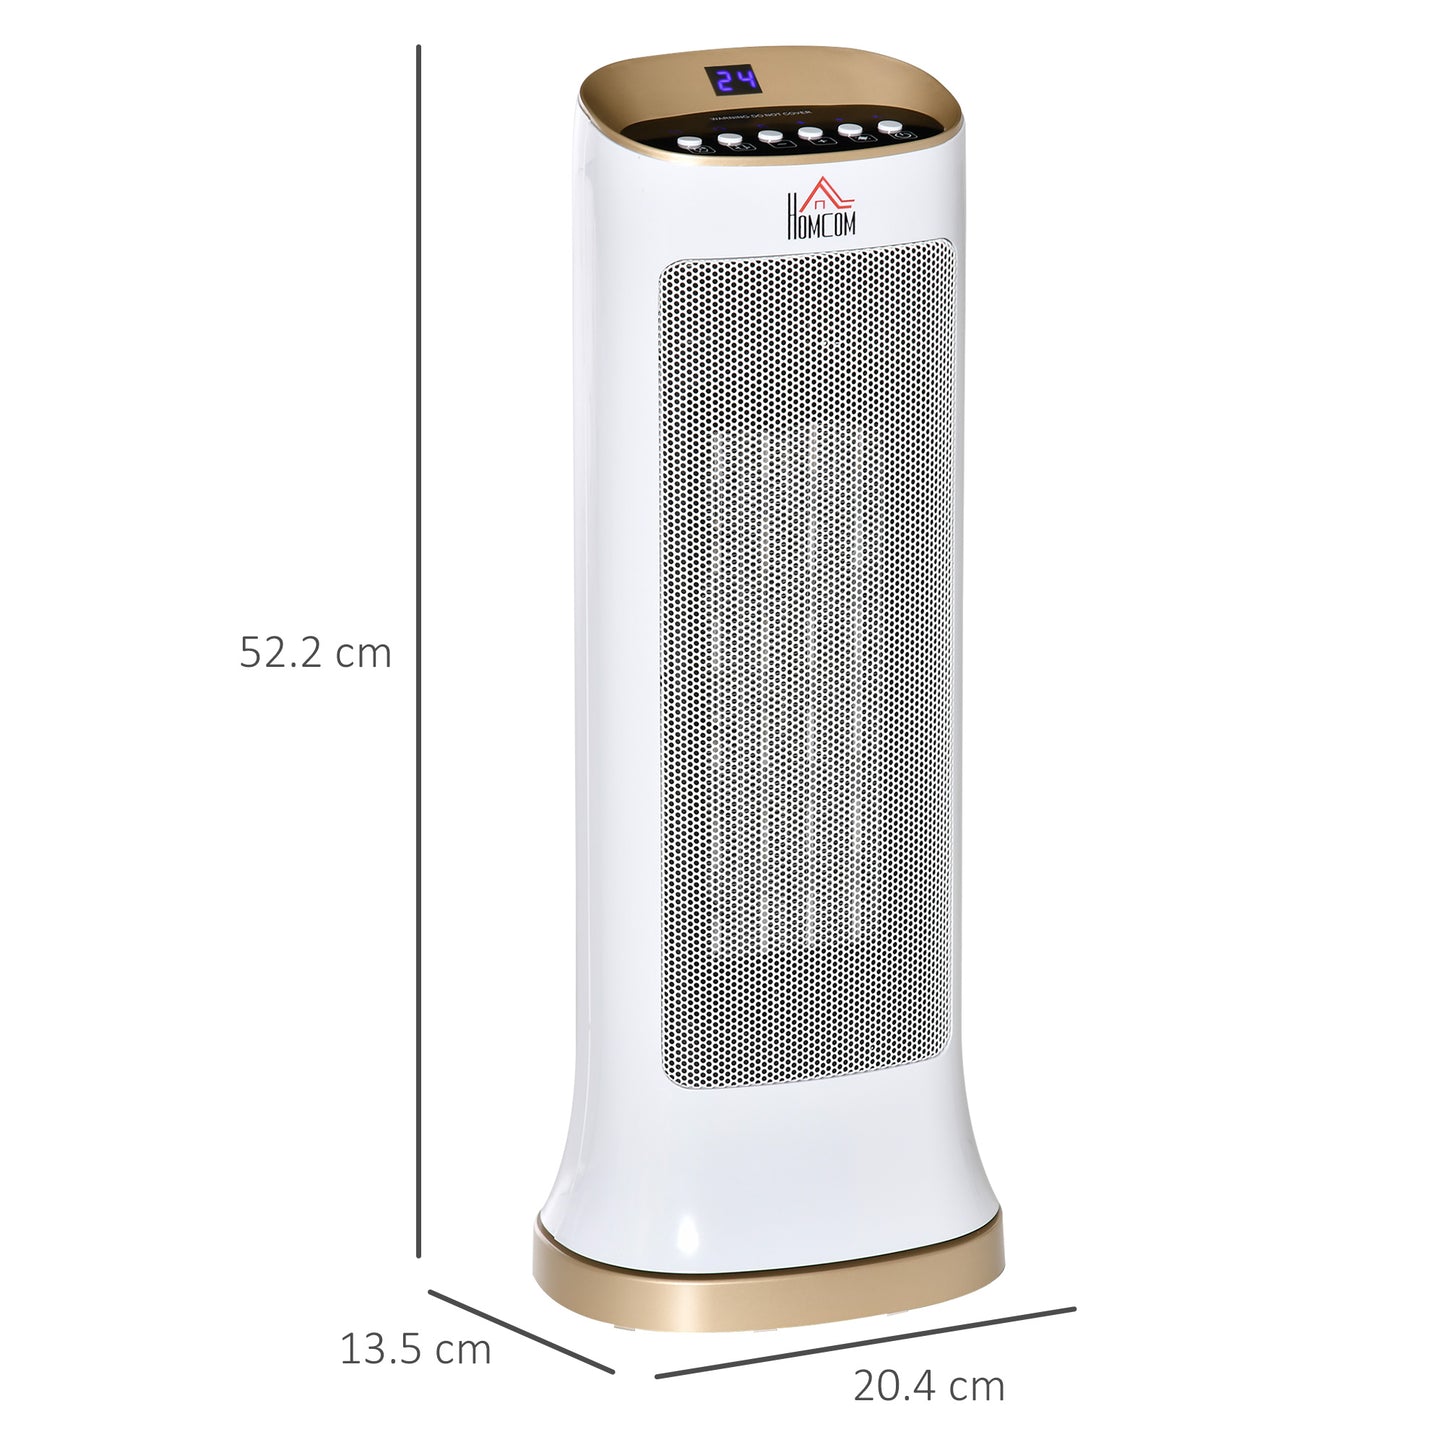 HOMCOM Ceramic Tower Heater 45° Oscillating Space Heater w/ Remote Control 8hr Timer Tip-Over Overheat Protection 1000W/2000W-White